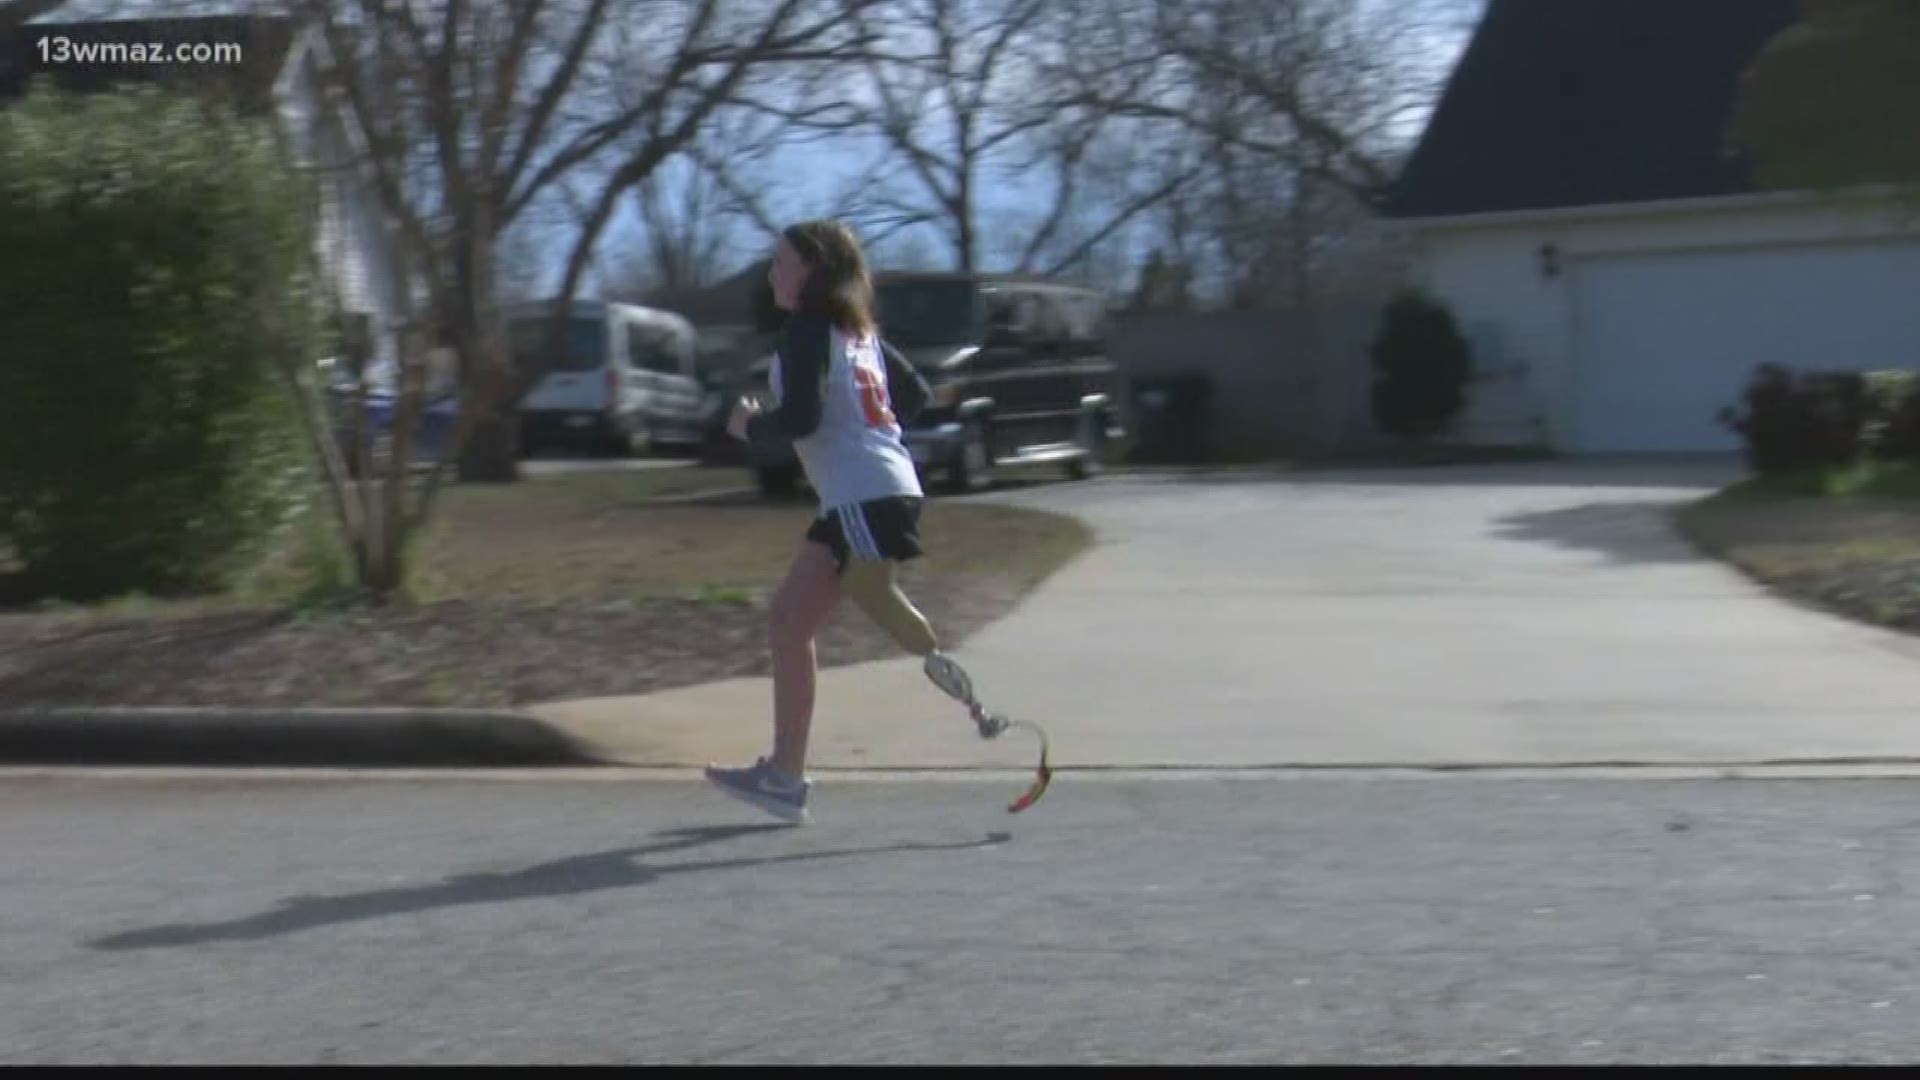 The Annual Cantrell Center 5K in Warner Robins is coming up, and one young athlete is getting ready. Leyah Allen doesn't let her prosthetic leg slow her down.